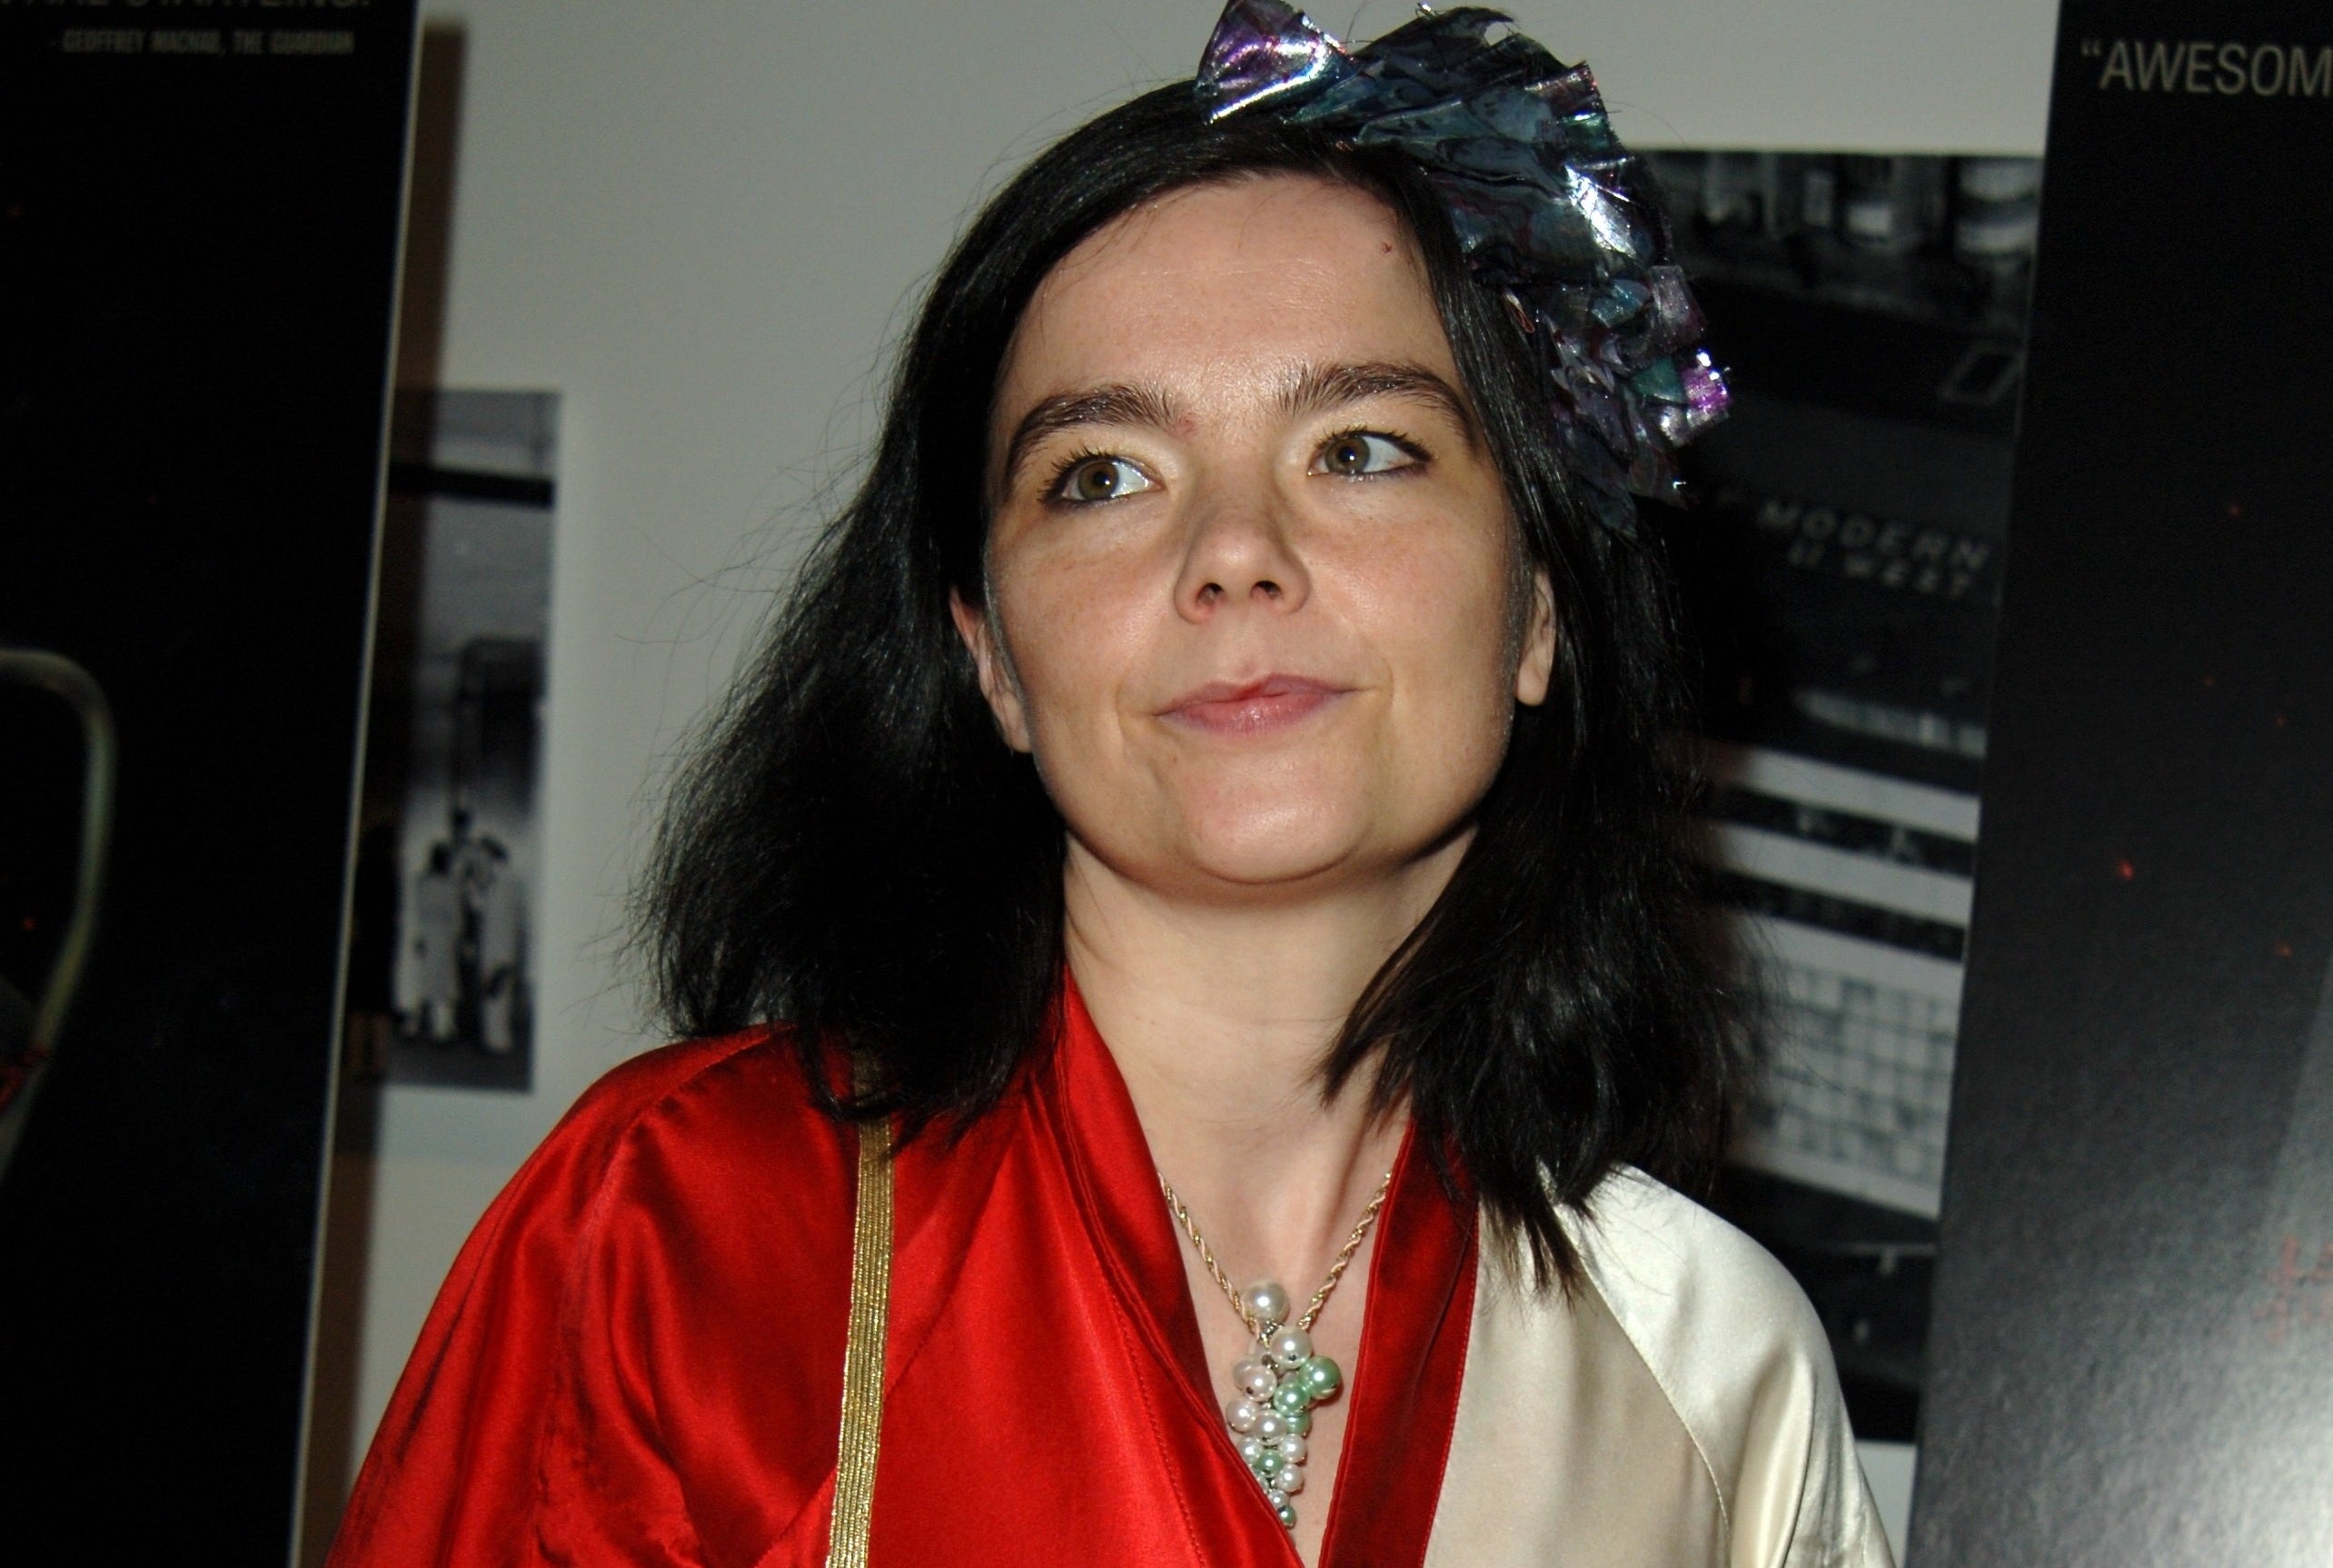 Bjork at an event, dressed in a red and cream dress